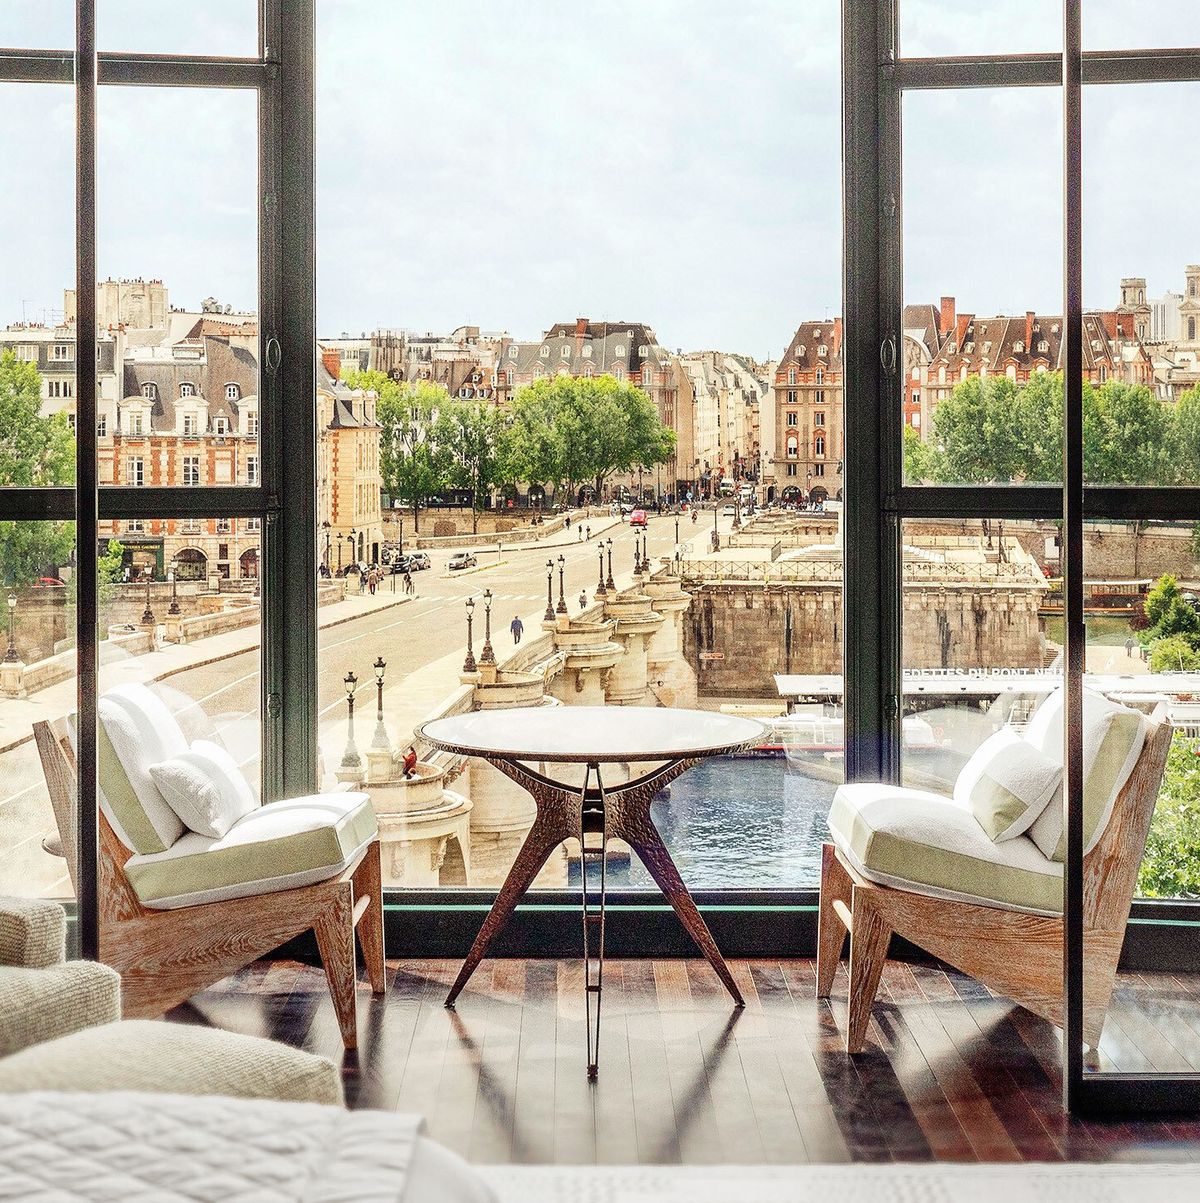 Cheval Blanc Paris: The Most Beautiful New Hotel in Paris Opens